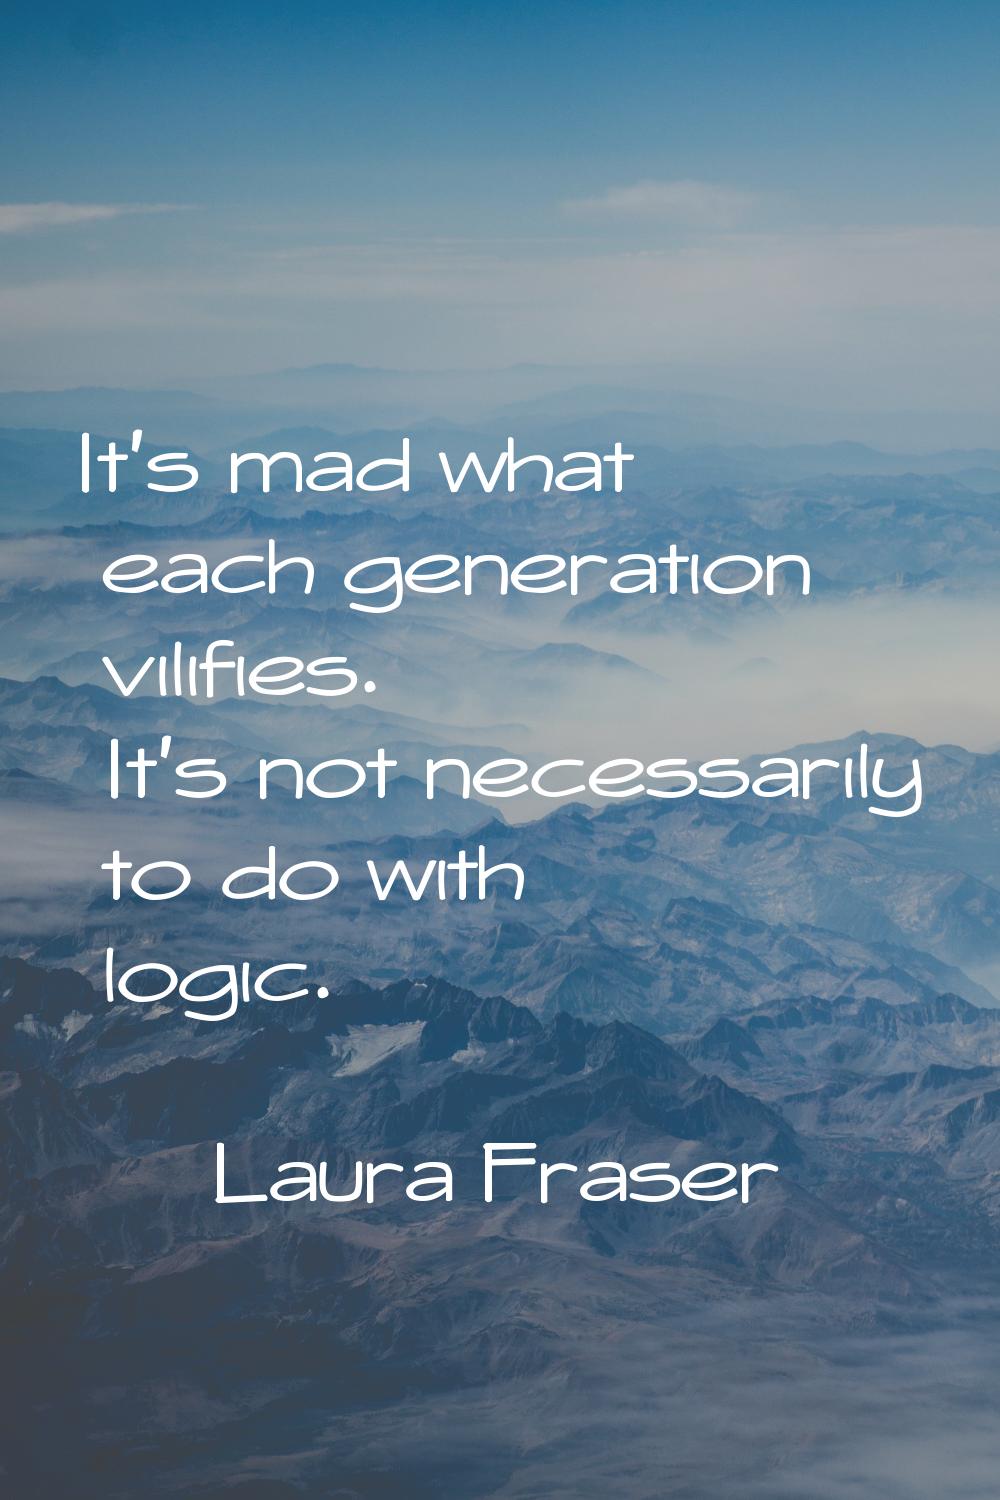 It's mad what each generation vilifies. It's not necessarily to do with logic.